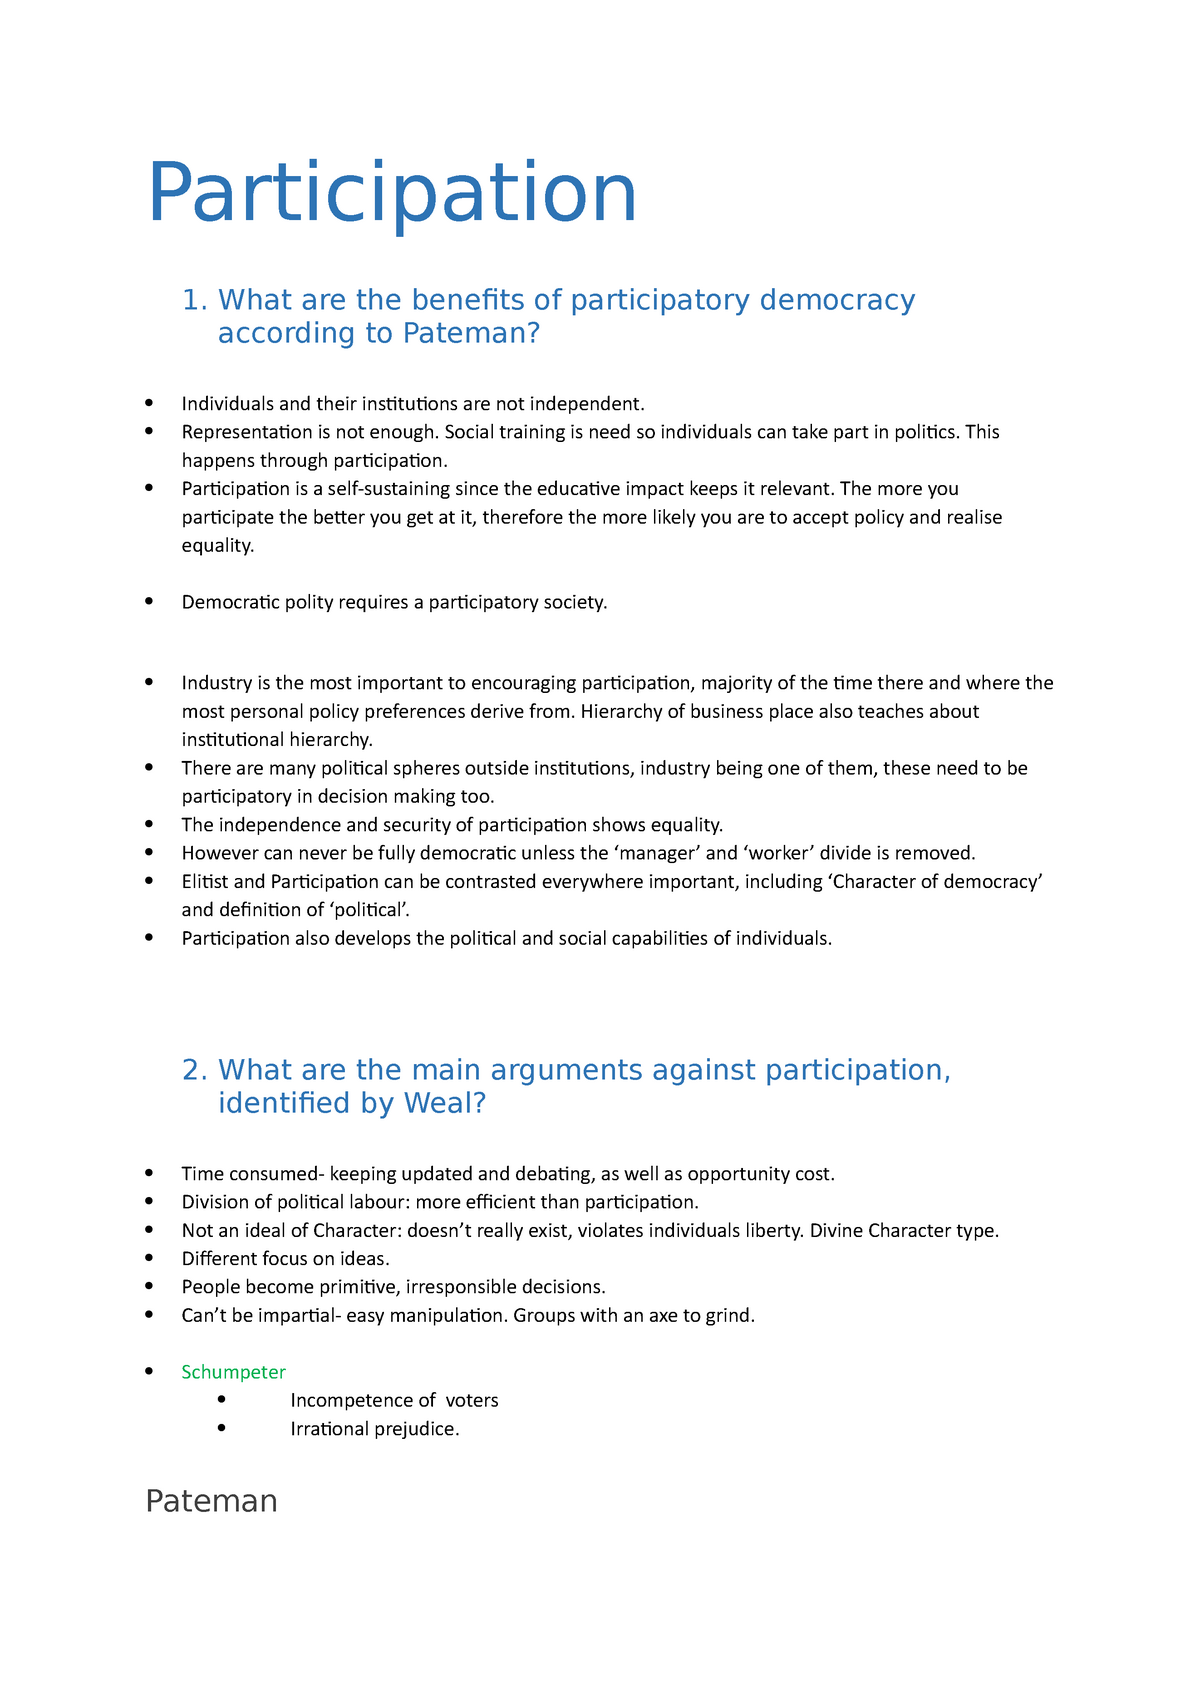 300 word essay highlighting the benefits of democratic participation